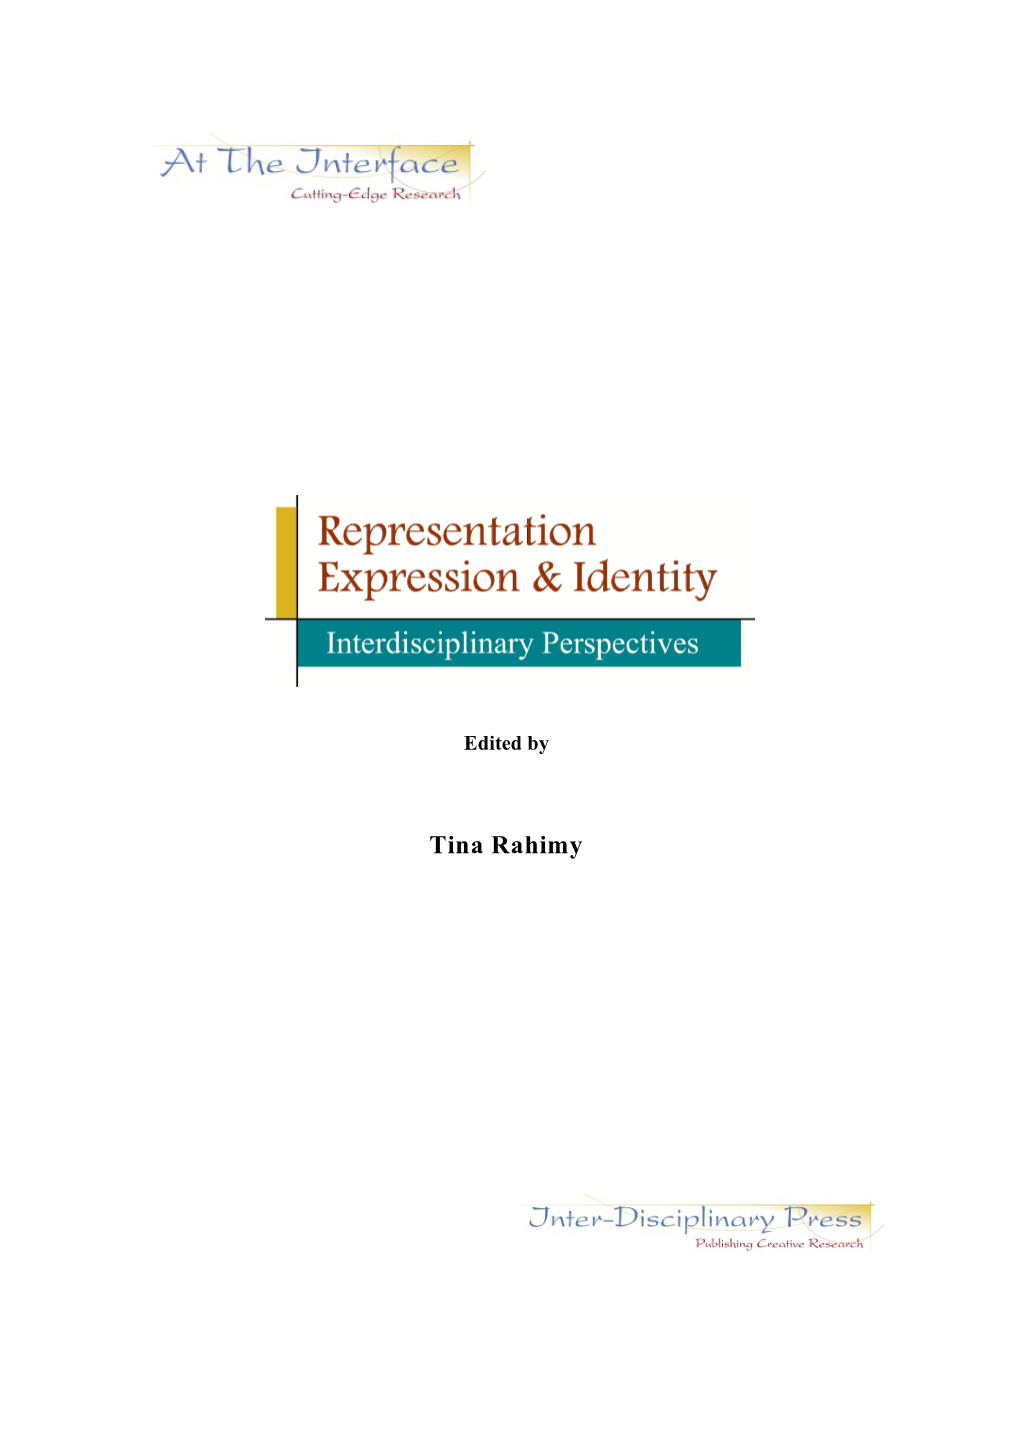 Representation, Expression and Identity: Interdisciplinary Insights on Multiculturalism, Conflict and Belonging